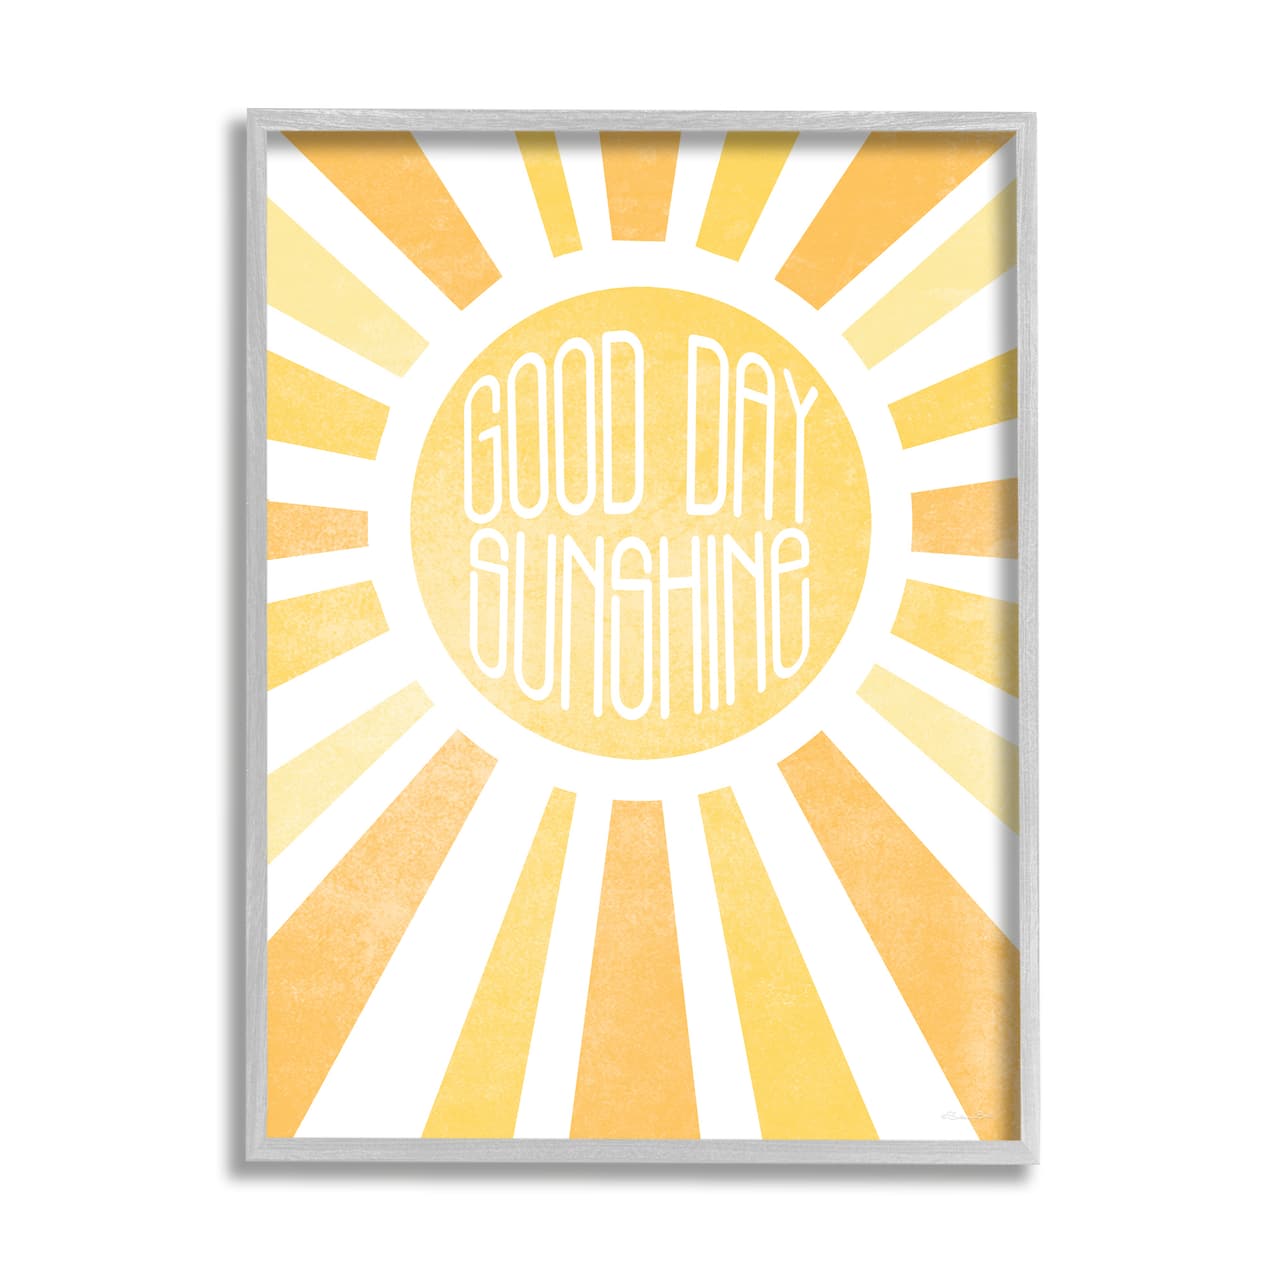 Stupell Industries Good Day Sunshine Greeting Wall Art in Gray Frame